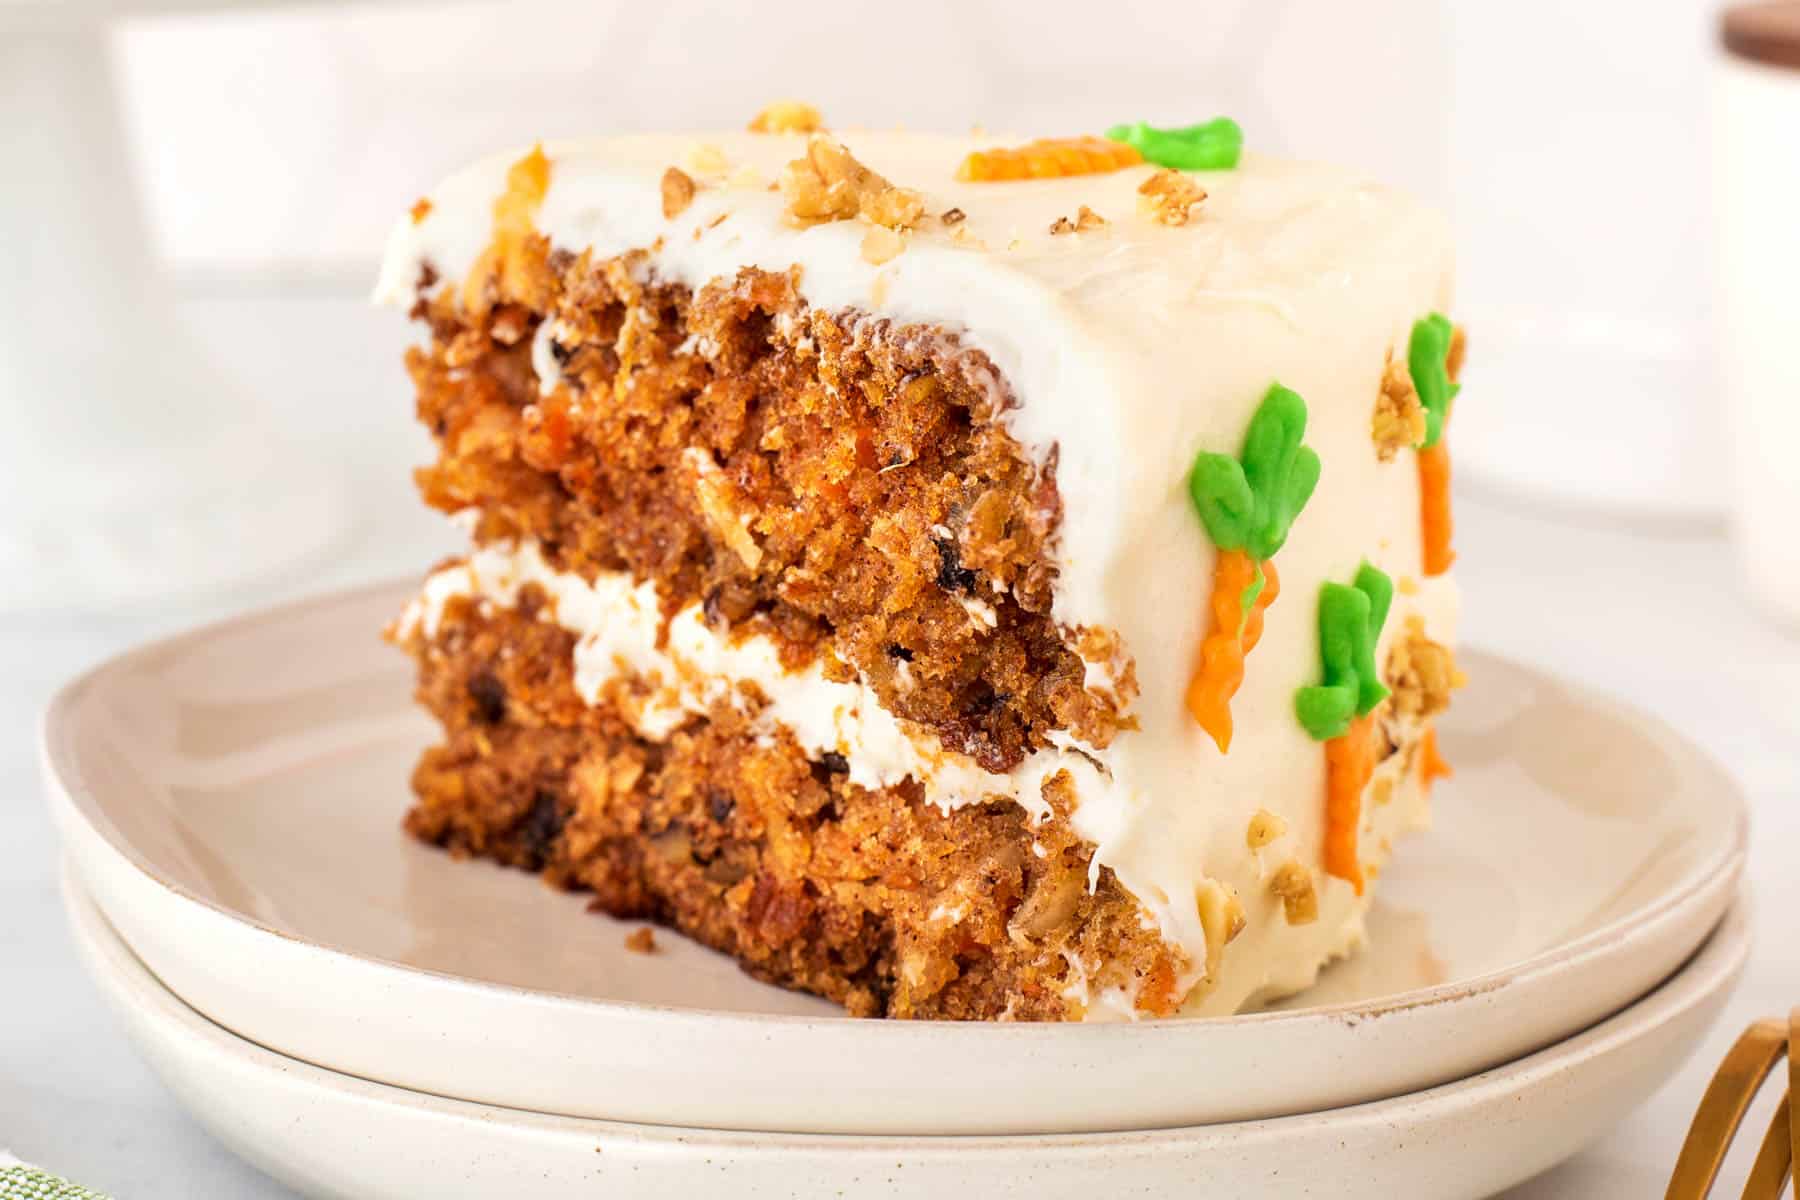 Slice of carrot cake on a plate. 